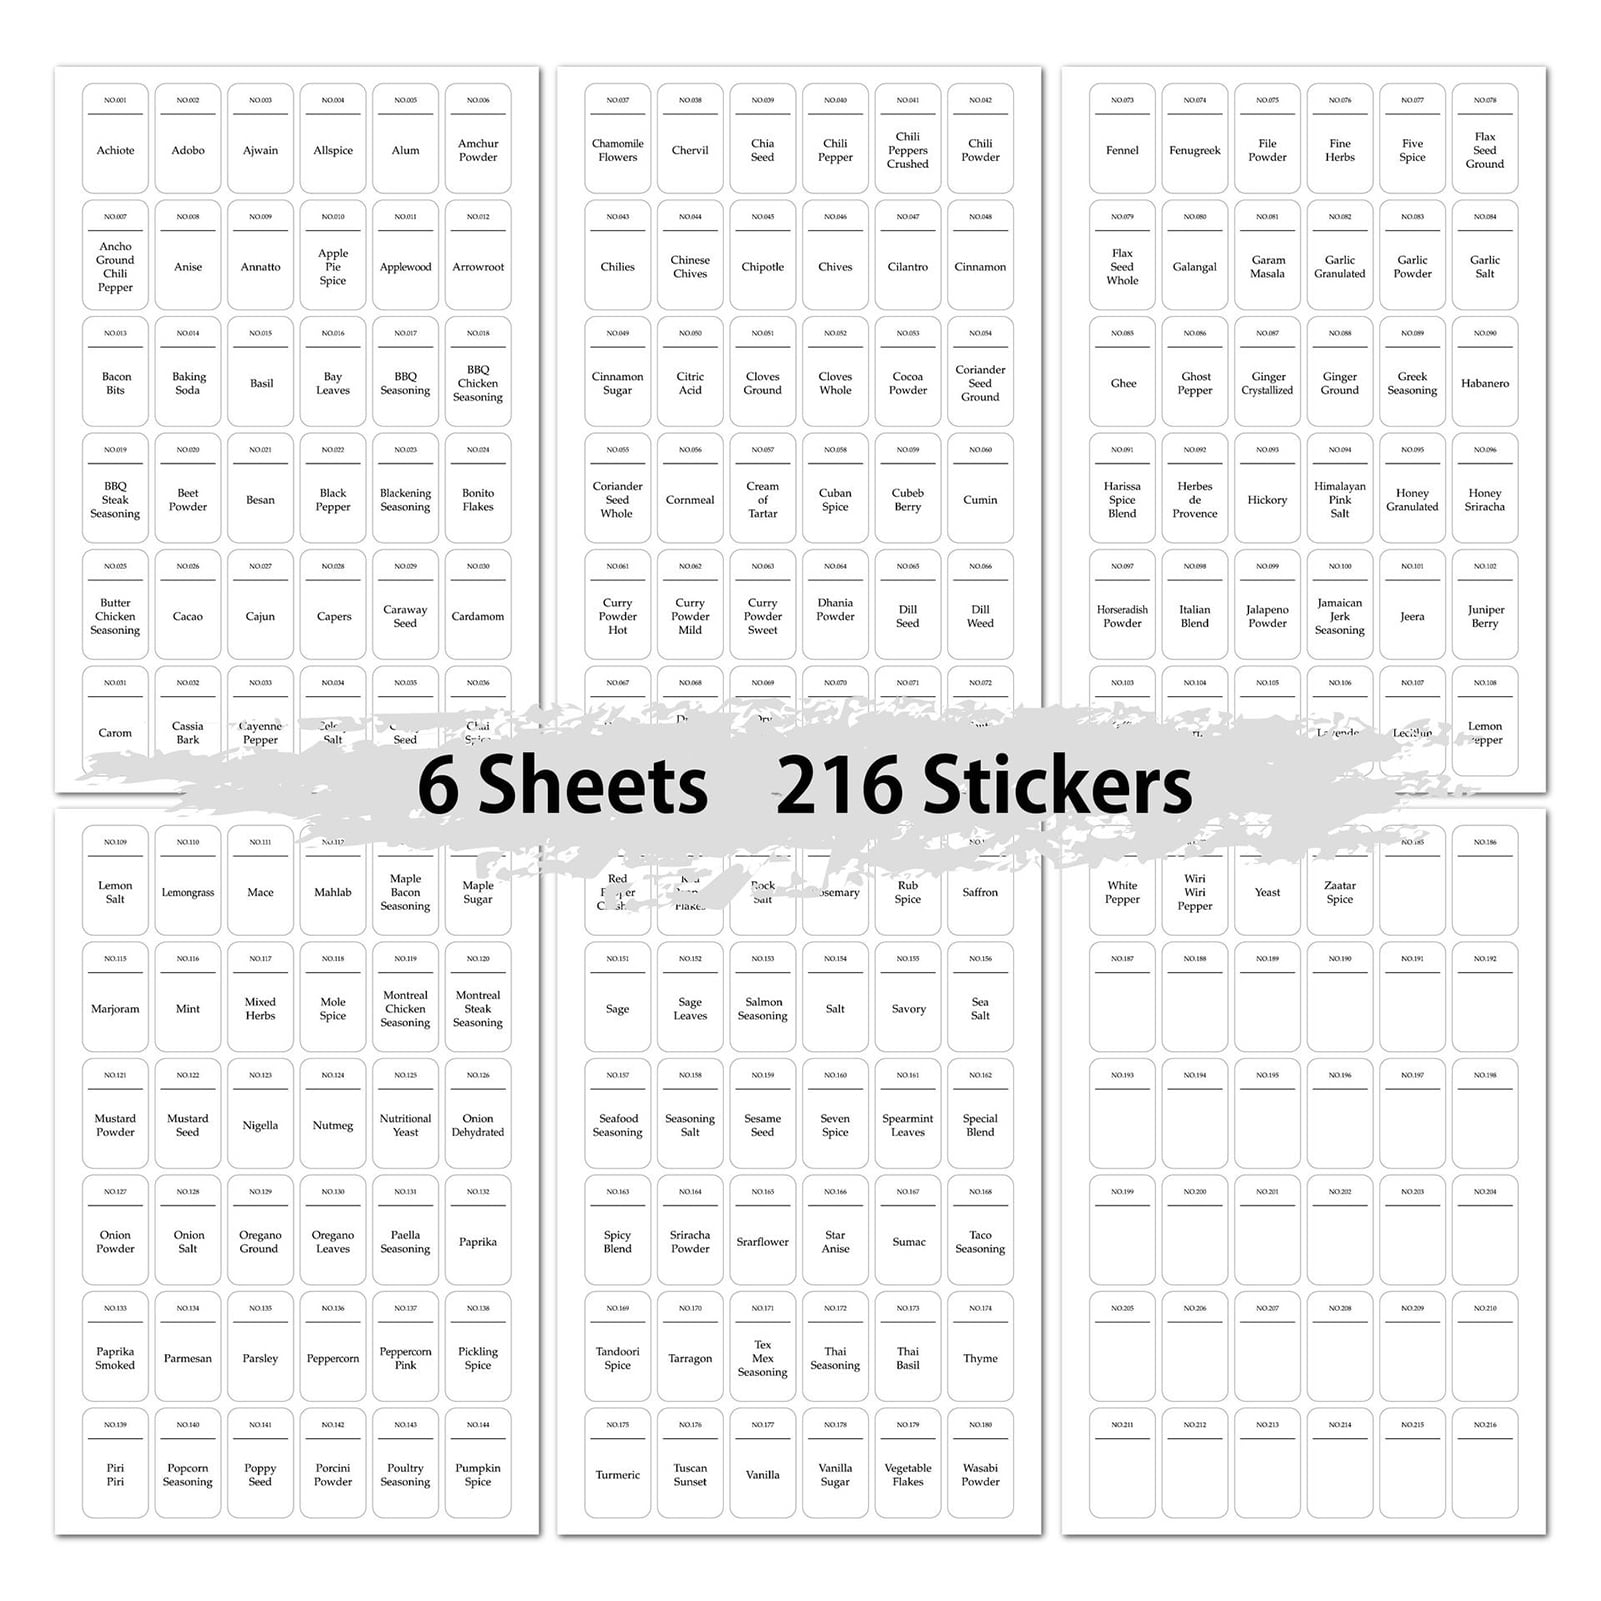 Spices Jar Labels Preprinted - 120 pcs Minimalist Spice Labels Stickers  Preprinted Waterproof Including Blank and Expiration Seasoning Labels to